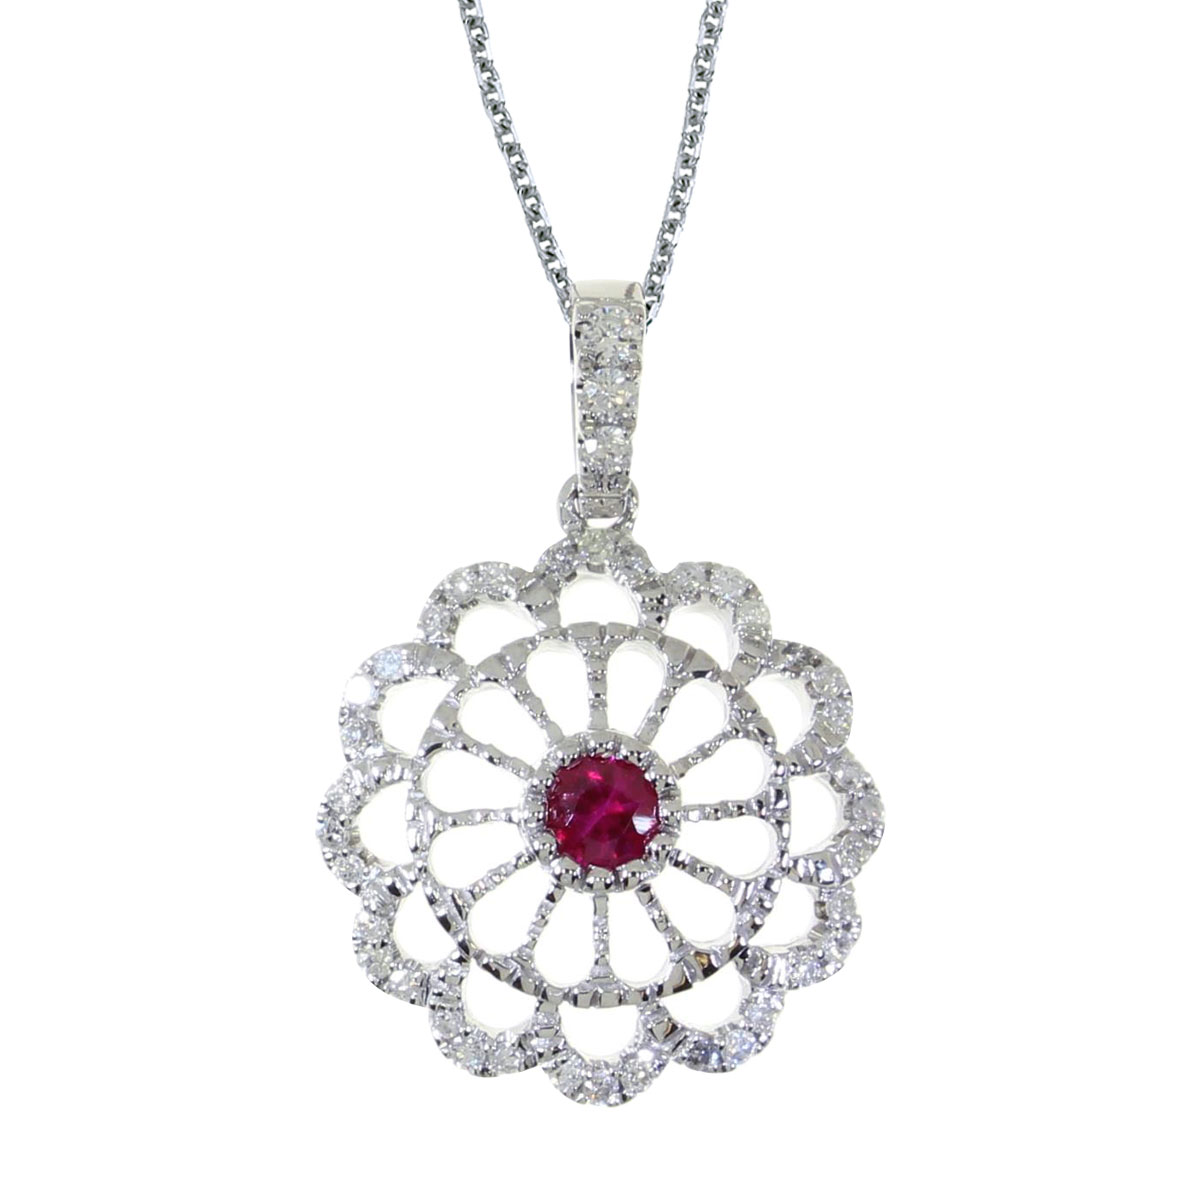 JCX2620: This beautiful 14k white gold  pendant features  a bright 3.5 mm round ruby and .05 carats of shimmering diamond.